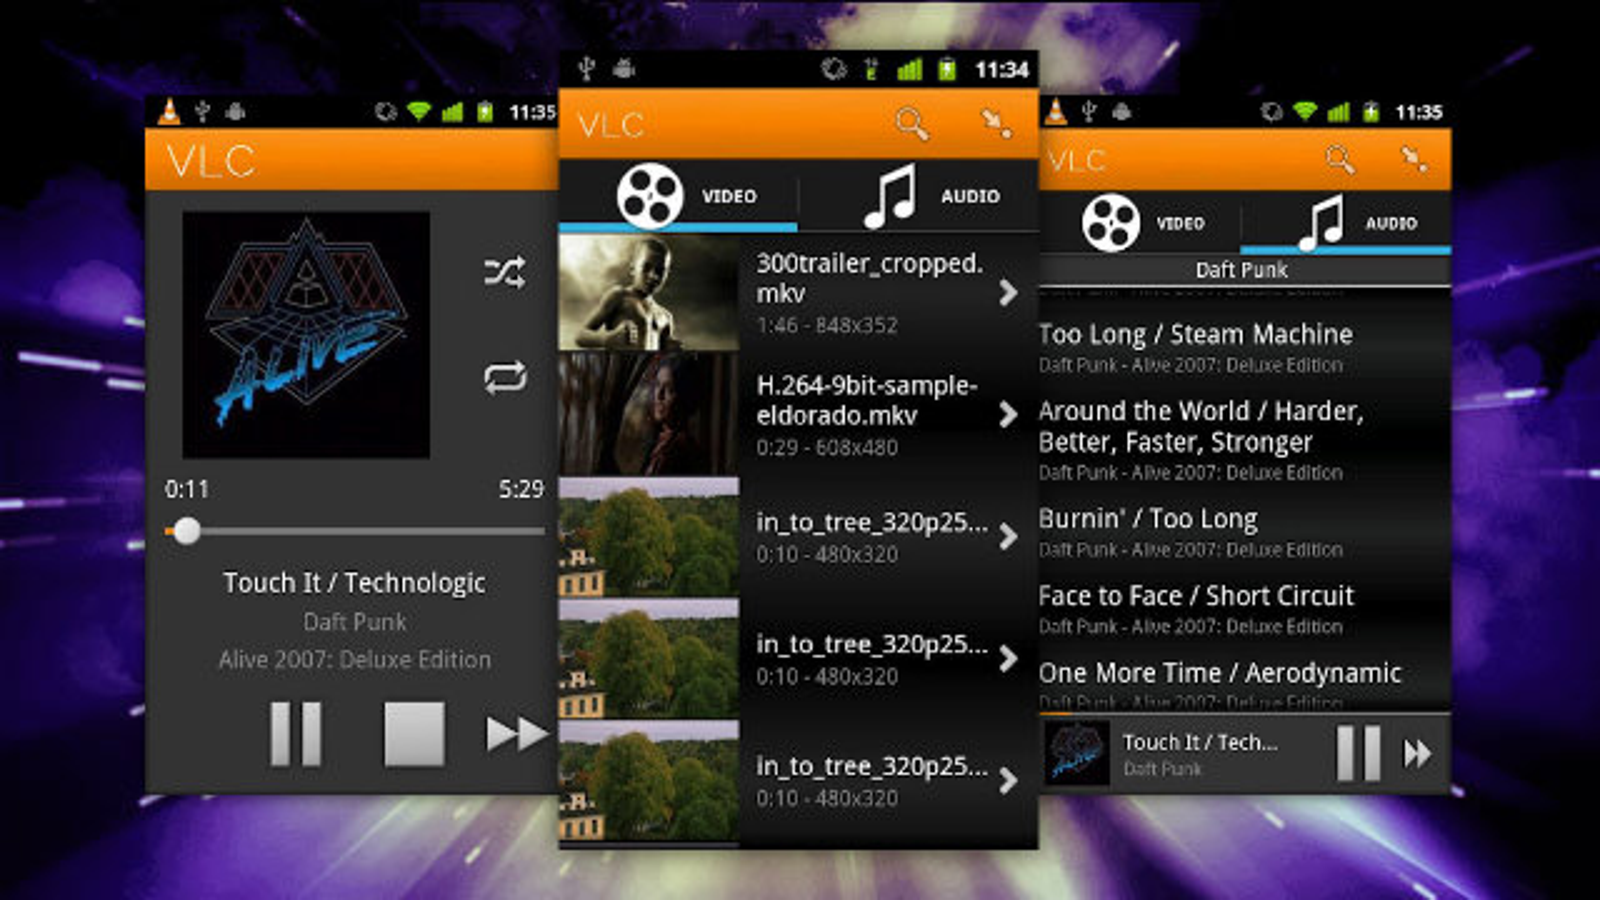 how to use media player android